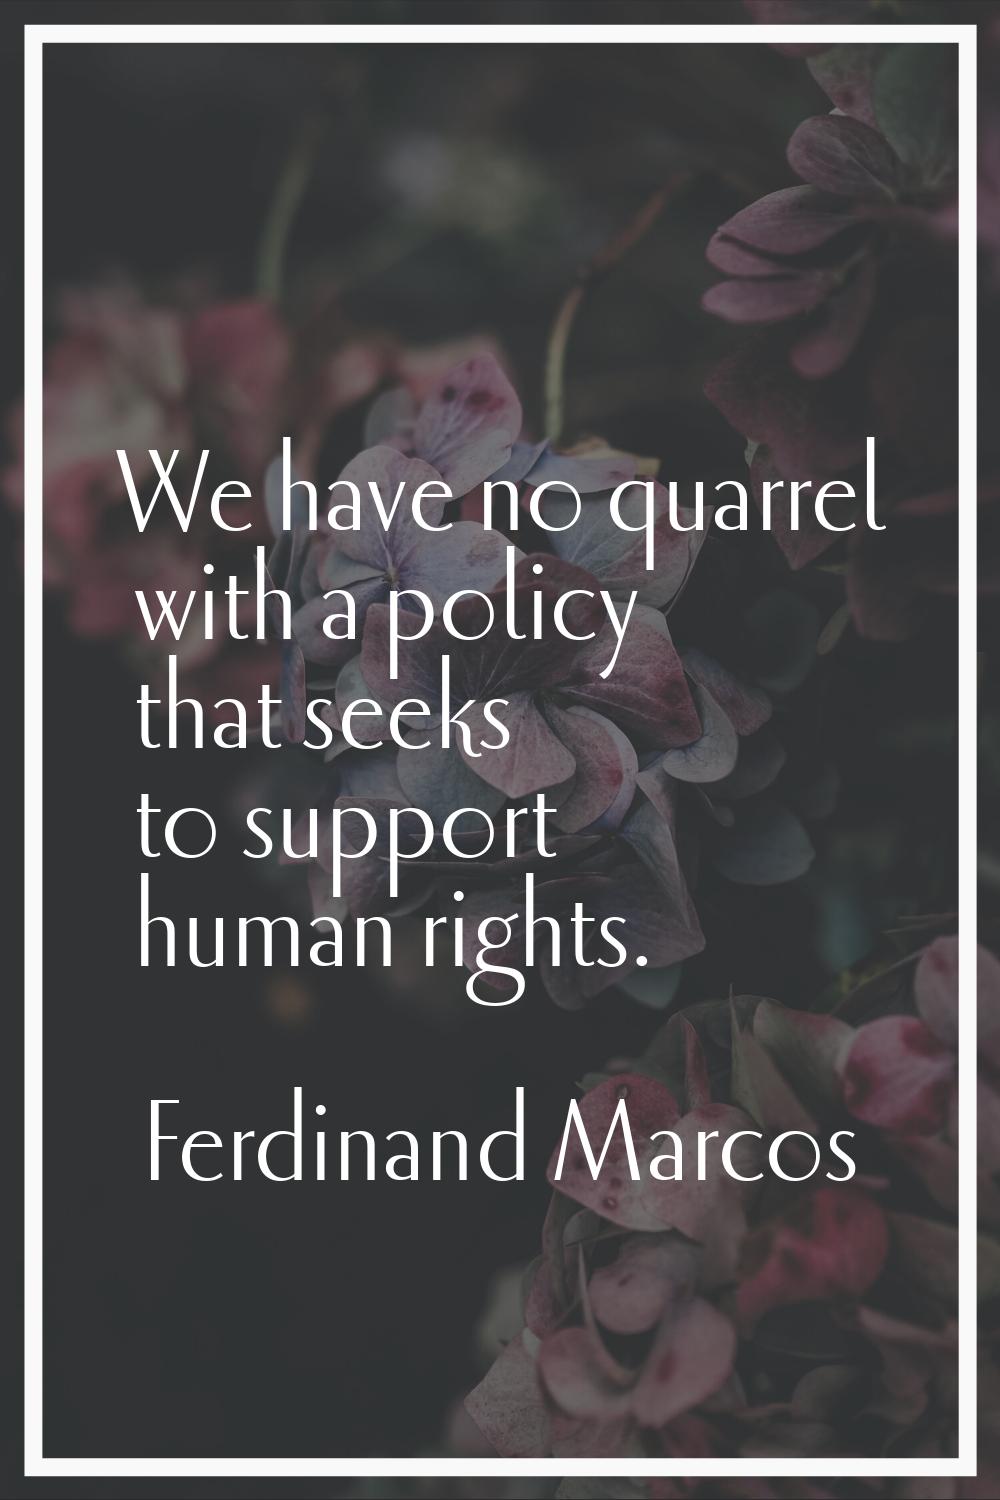 We have no quarrel with a policy that seeks to support human rights.